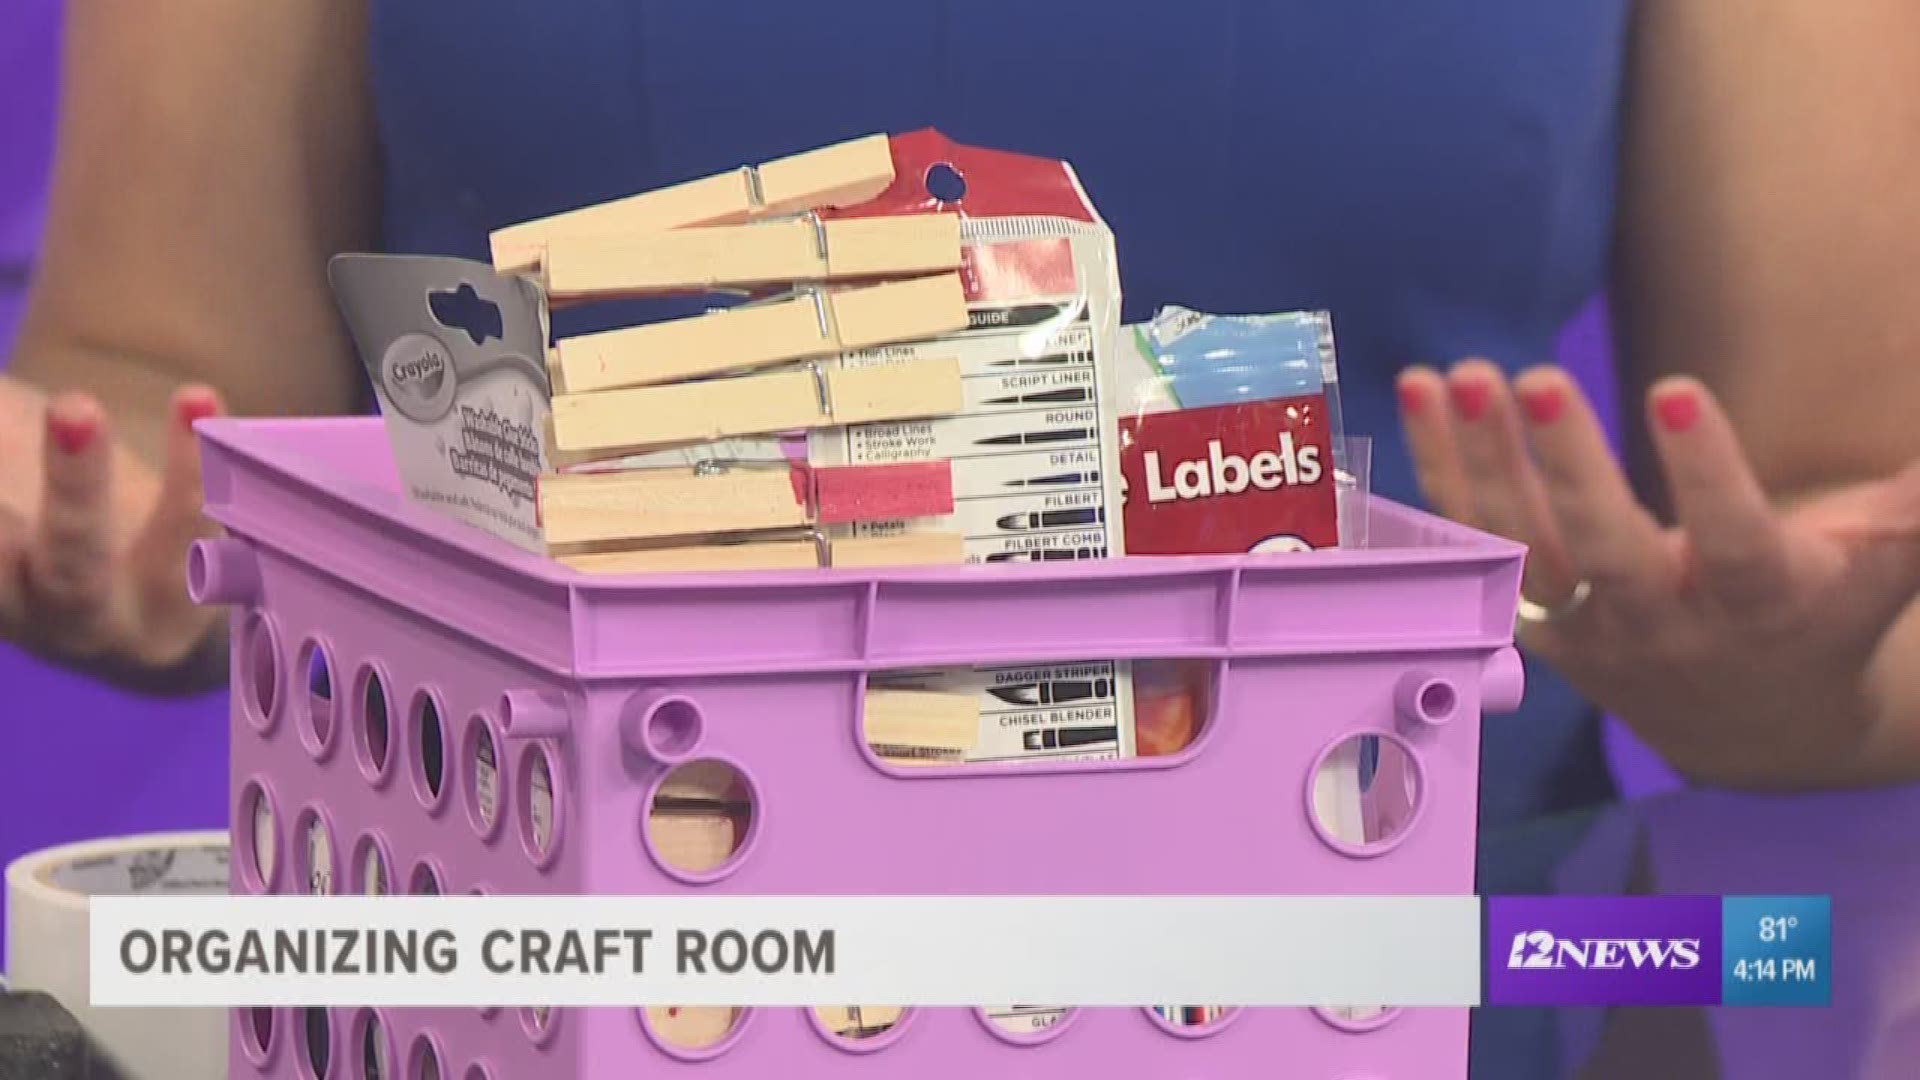 We organized The Beat craft items! If you have any other ideas to help keep that craft room organized, share it with us using #TheBeaton12.